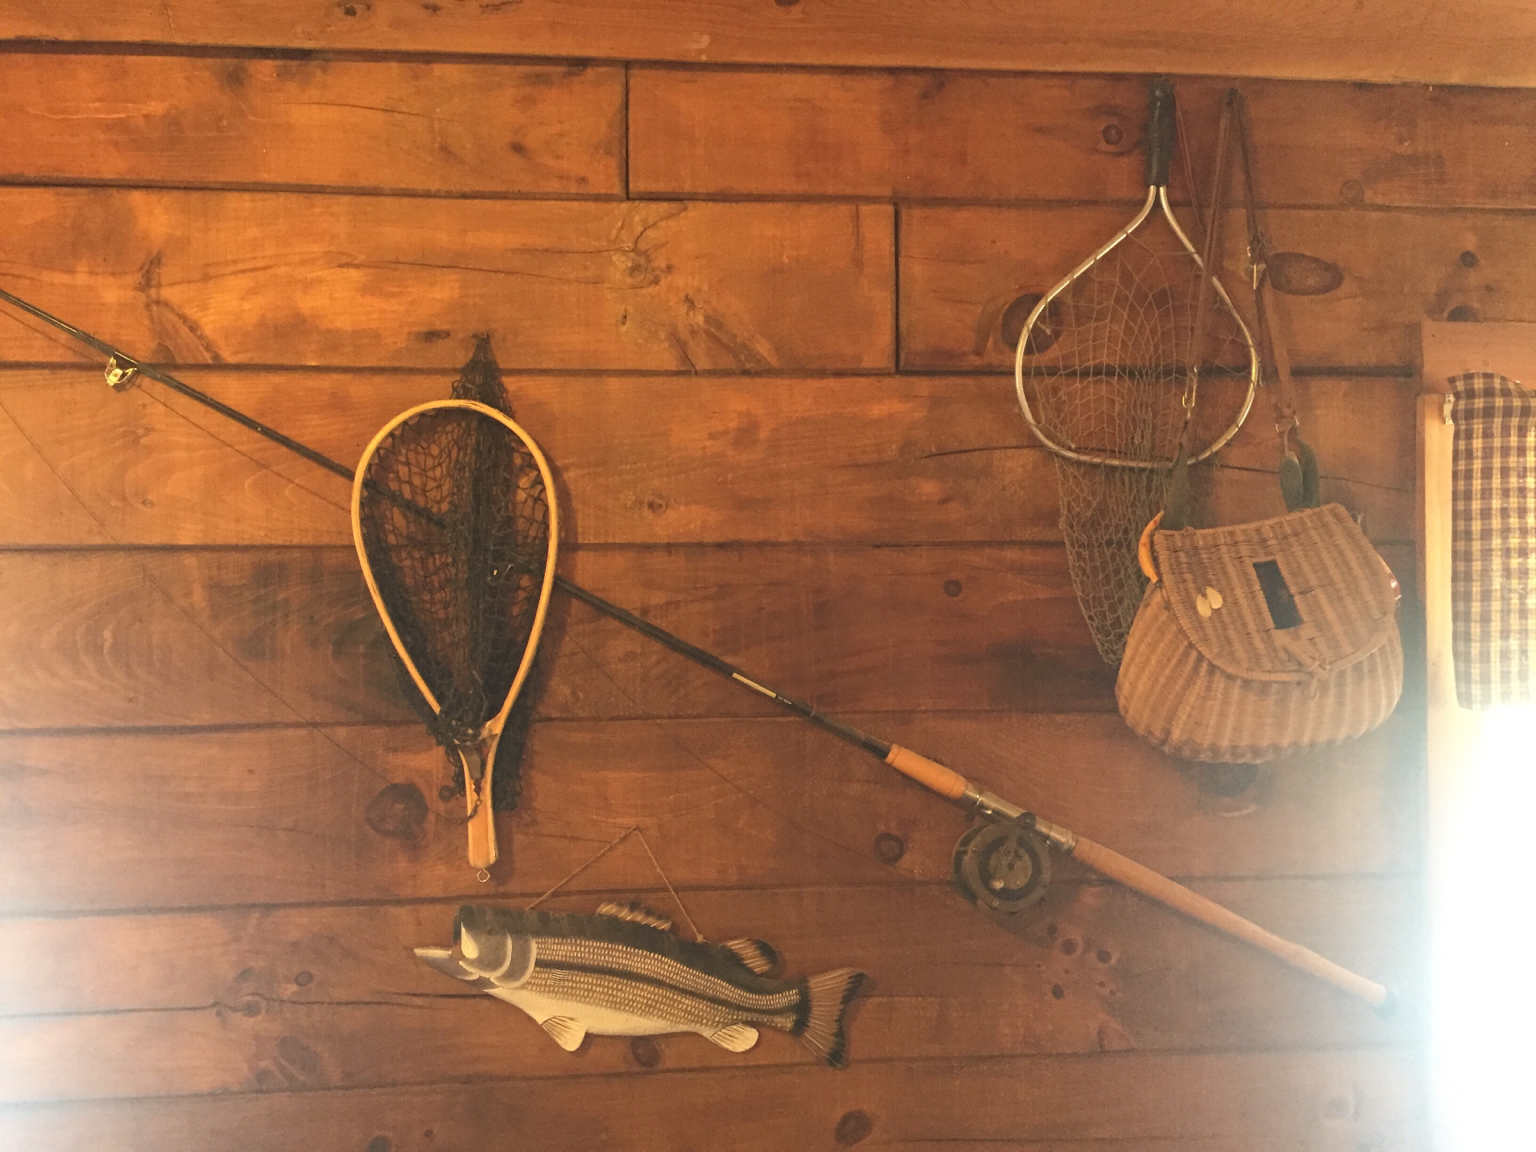 Antiques fishing wall decorations - Classifieds - Buy, Sell, Trade